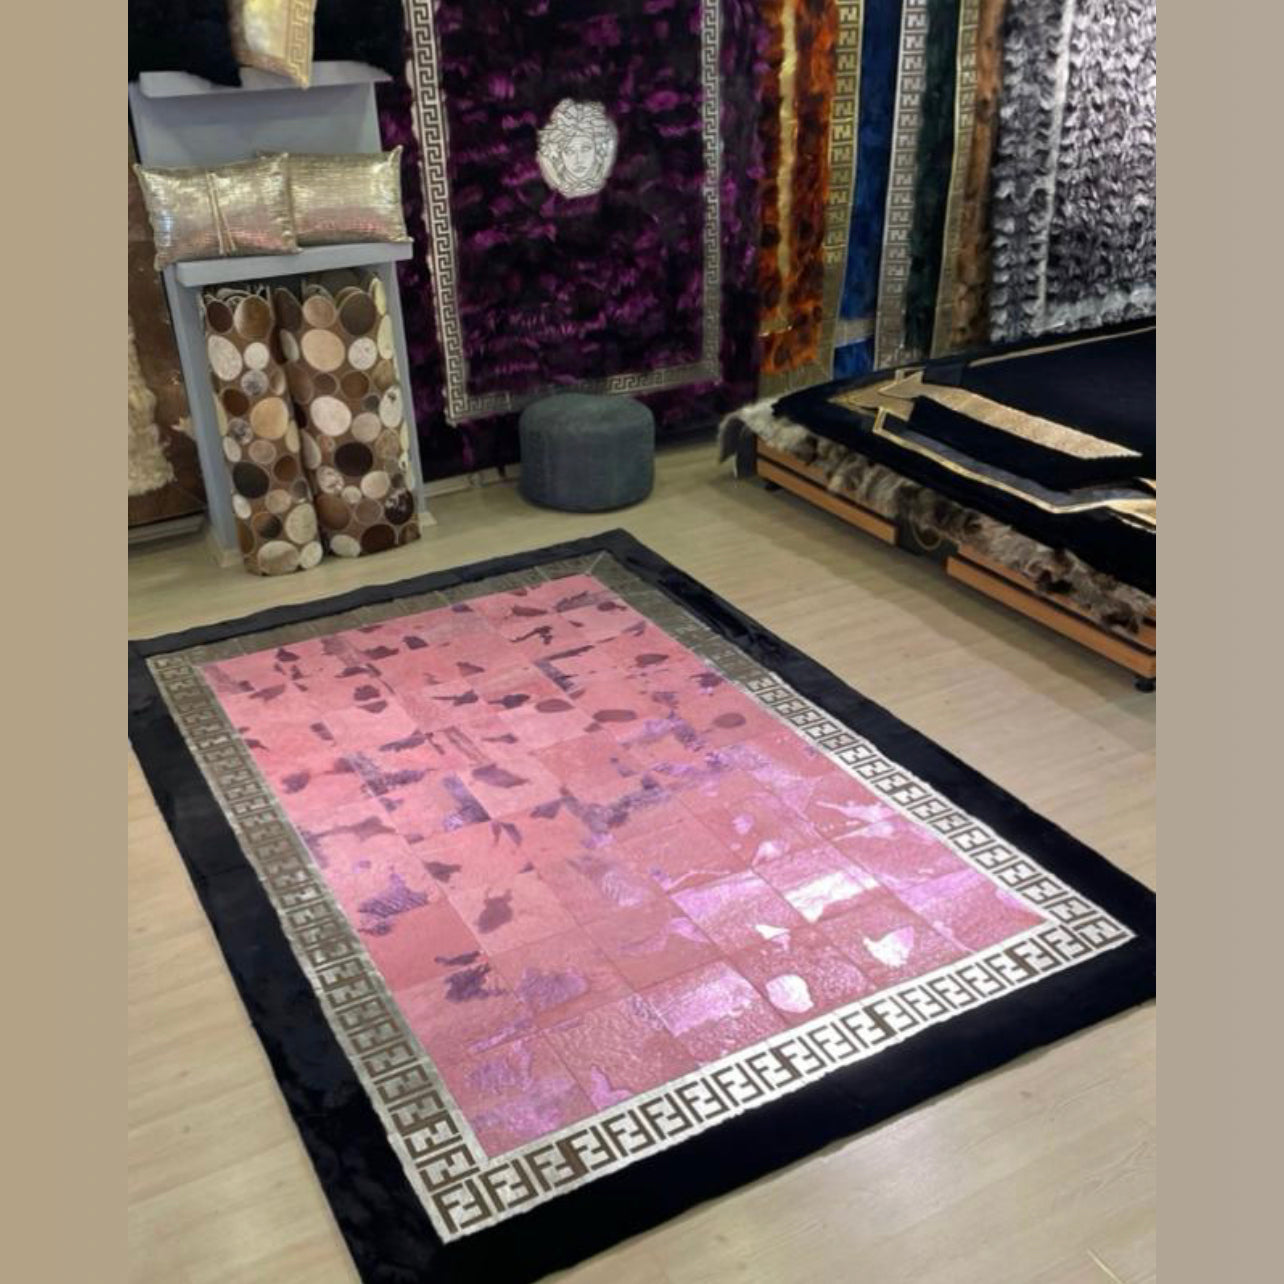 Black and Gold/Blue Multicolor Versace Rug